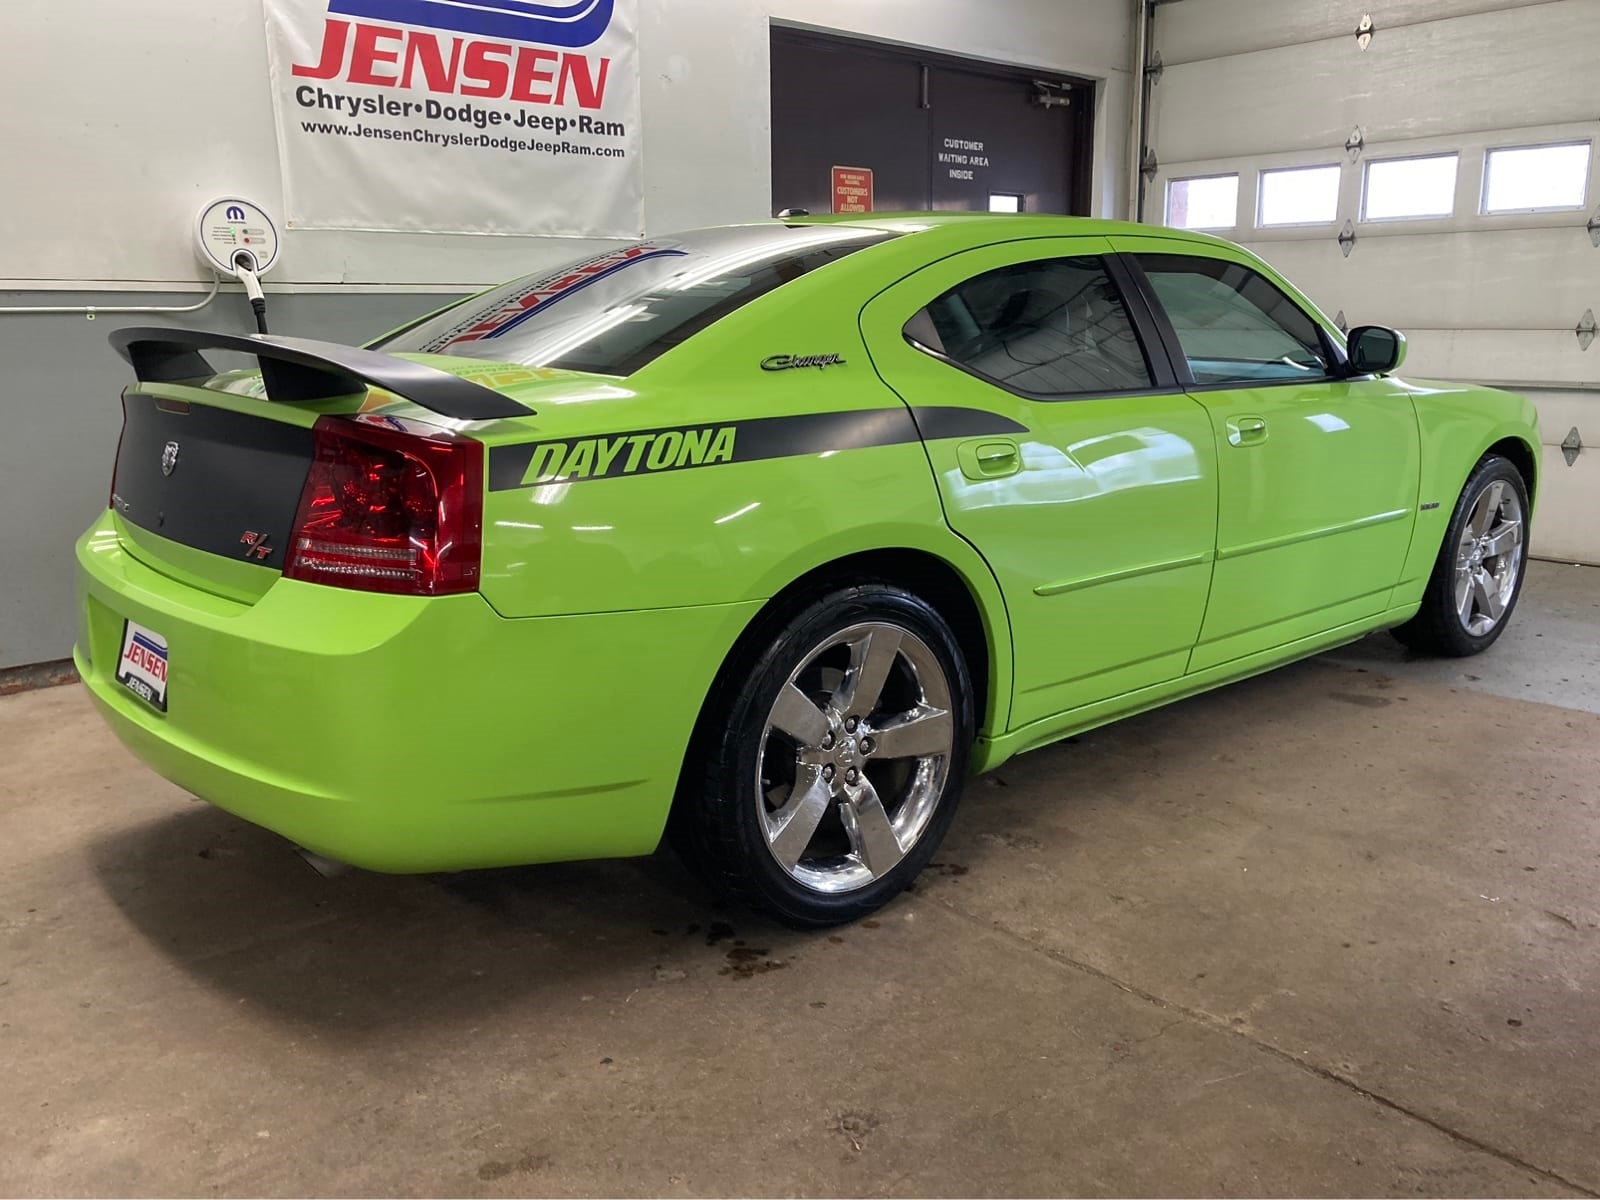 Used 2007 Dodge Charger R/T with VIN 2B3KA53H57H745502 for sale in New Ulm, Minnesota